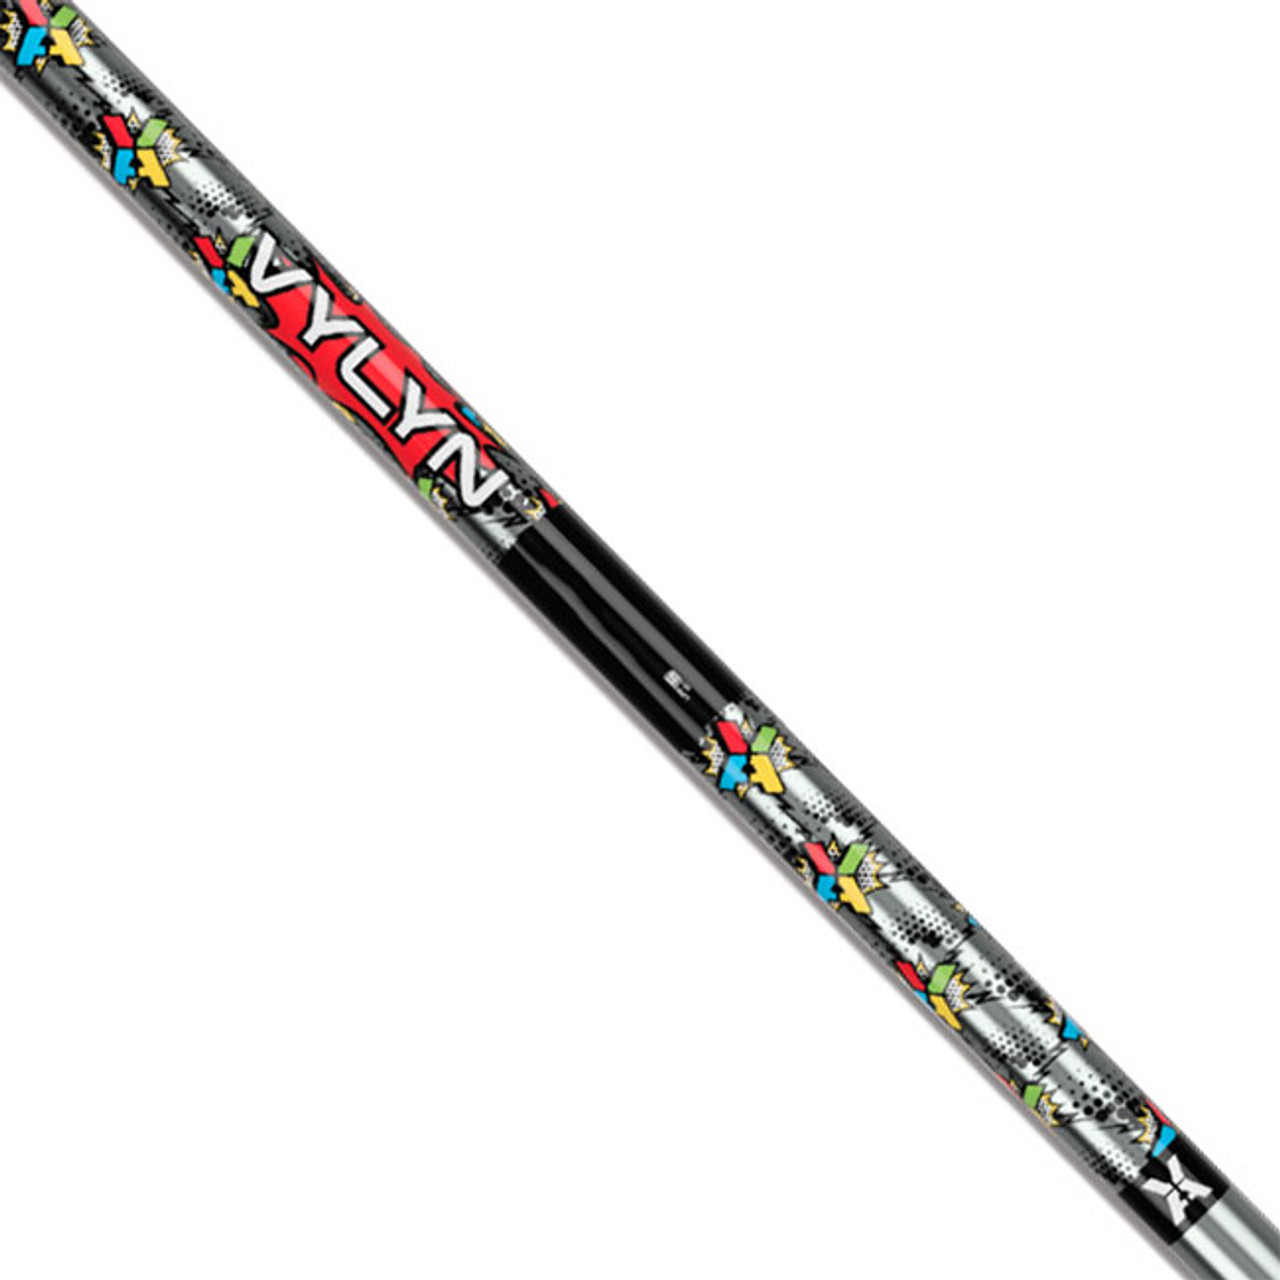 VA Composites VYLYN 65 Graphite Shaft + Adapter and Grip